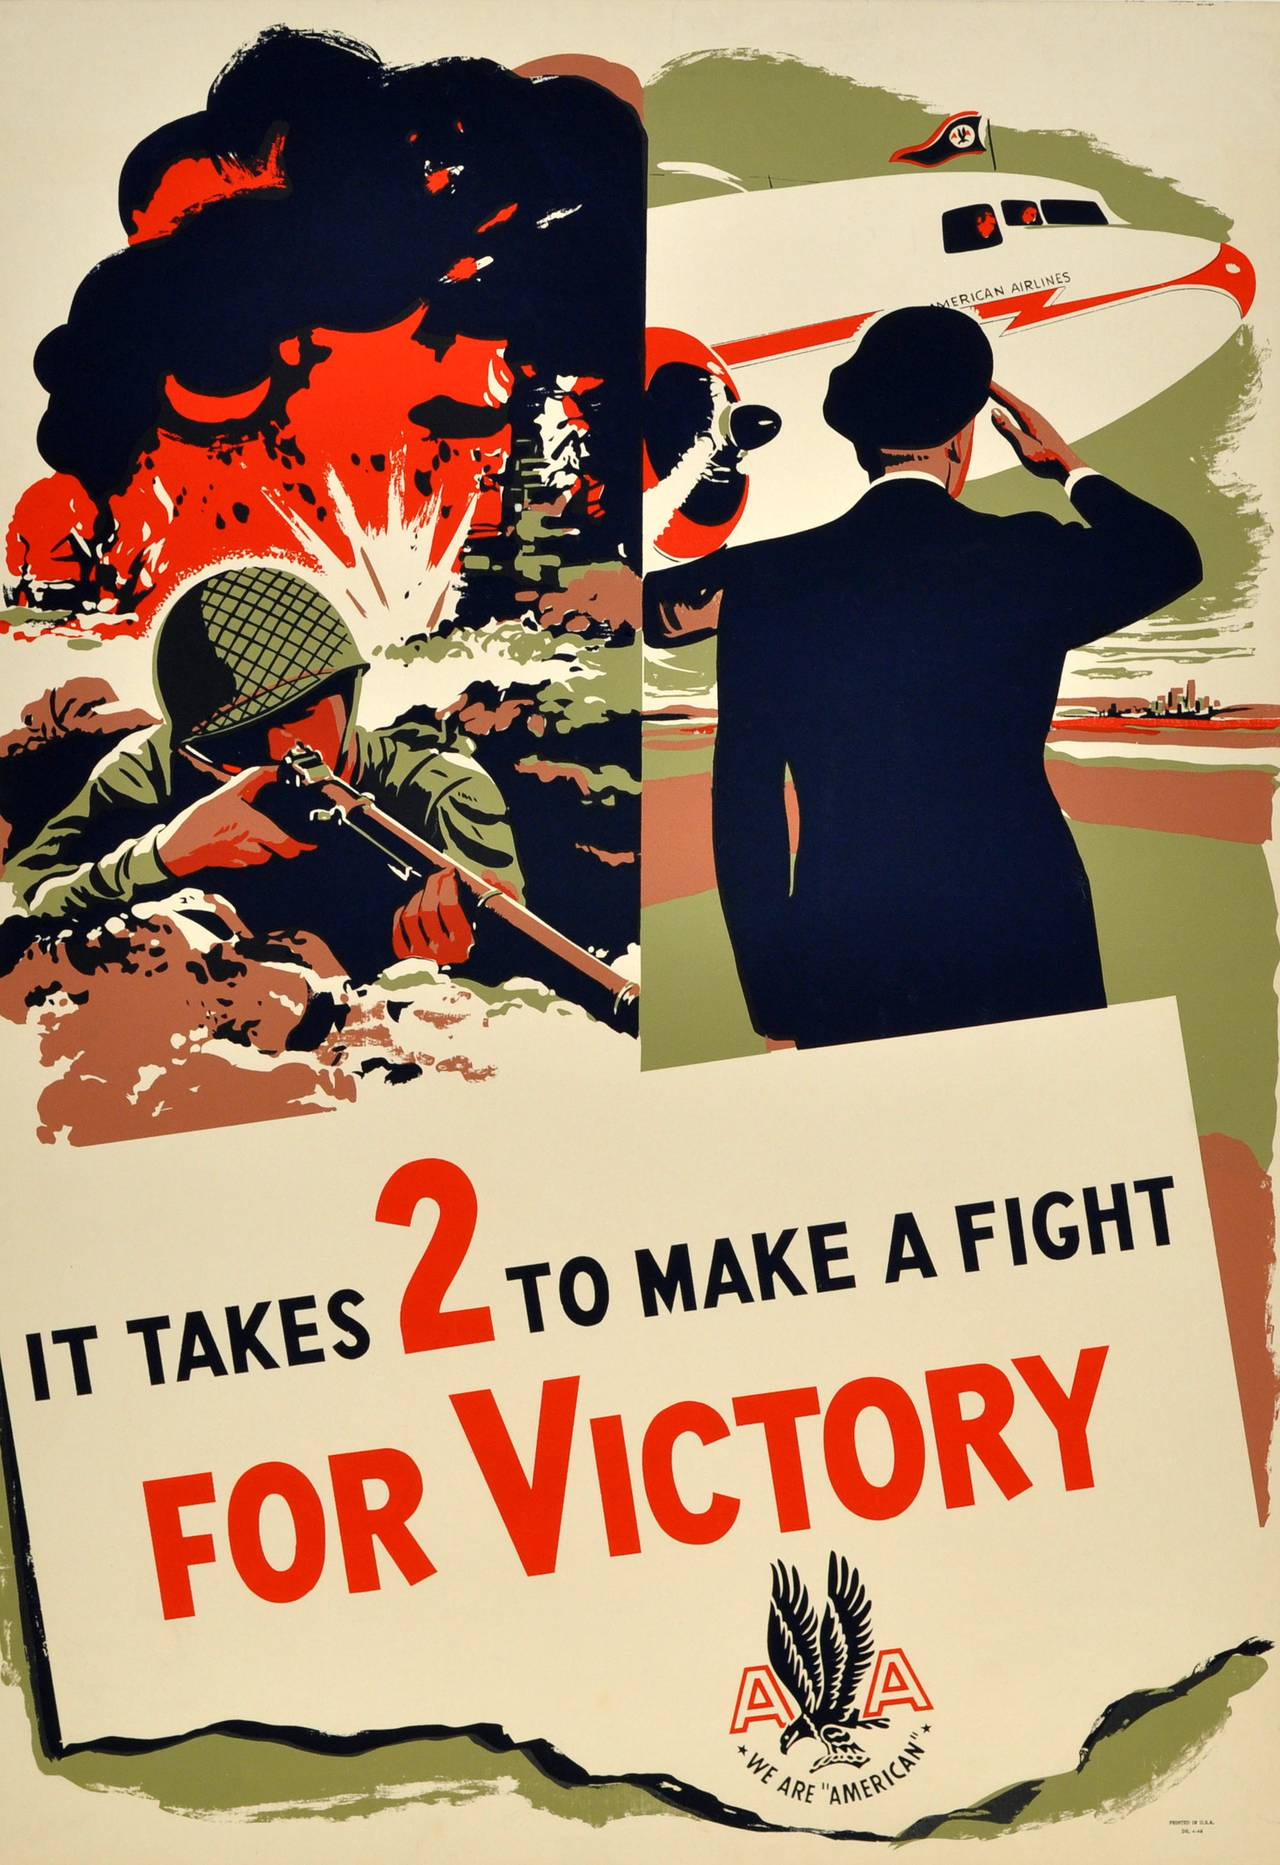 Unknown Print - Original WW2 American Airlines Poster - It Takes 2 To Make A Fight For Victory